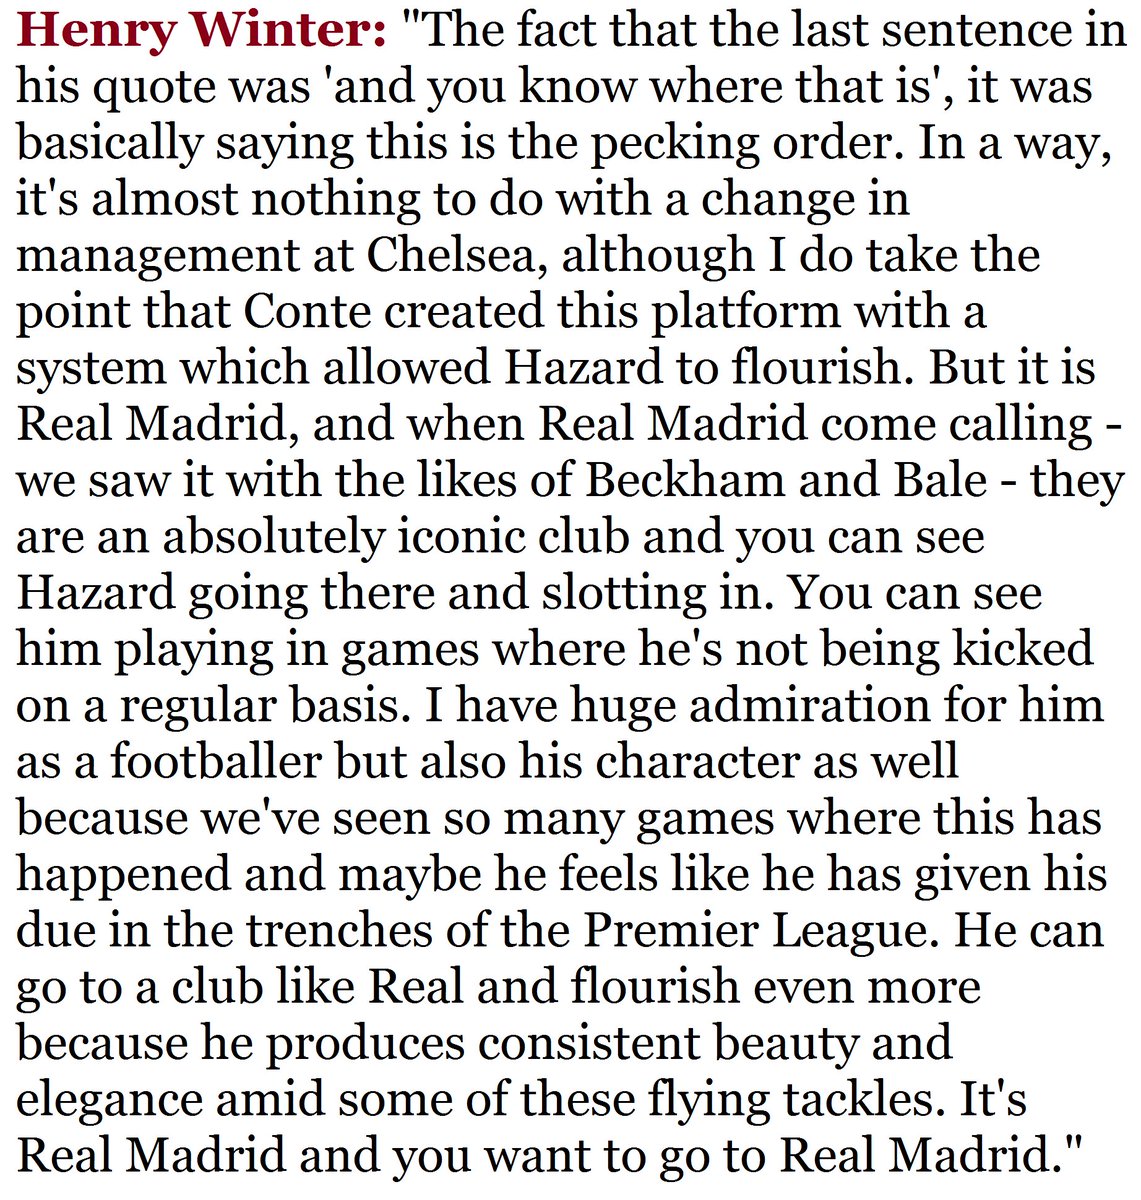 The Times' chief football writer Henry Winter & the Mirror's chief sports writer Andy Dunn on Hazard to Real Madrid.